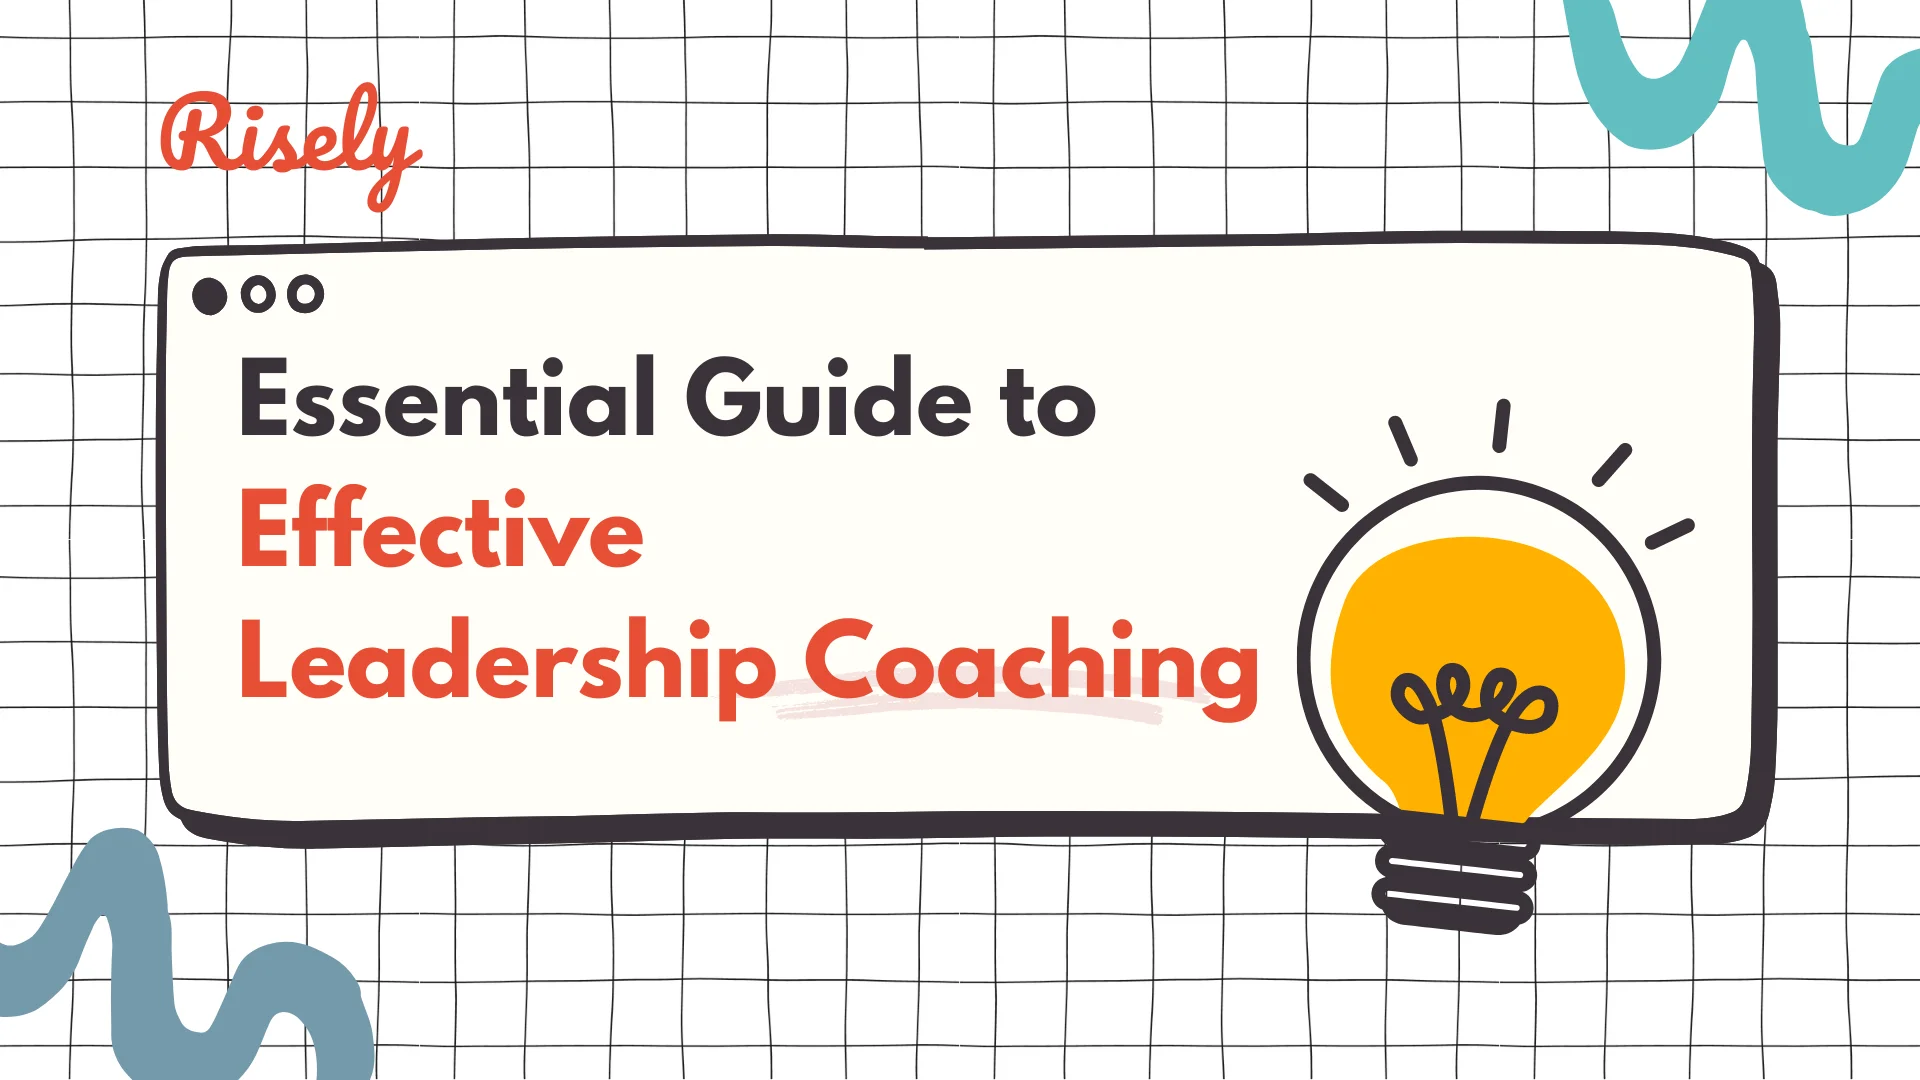 Essential Guide to Effective Leadership Coaching